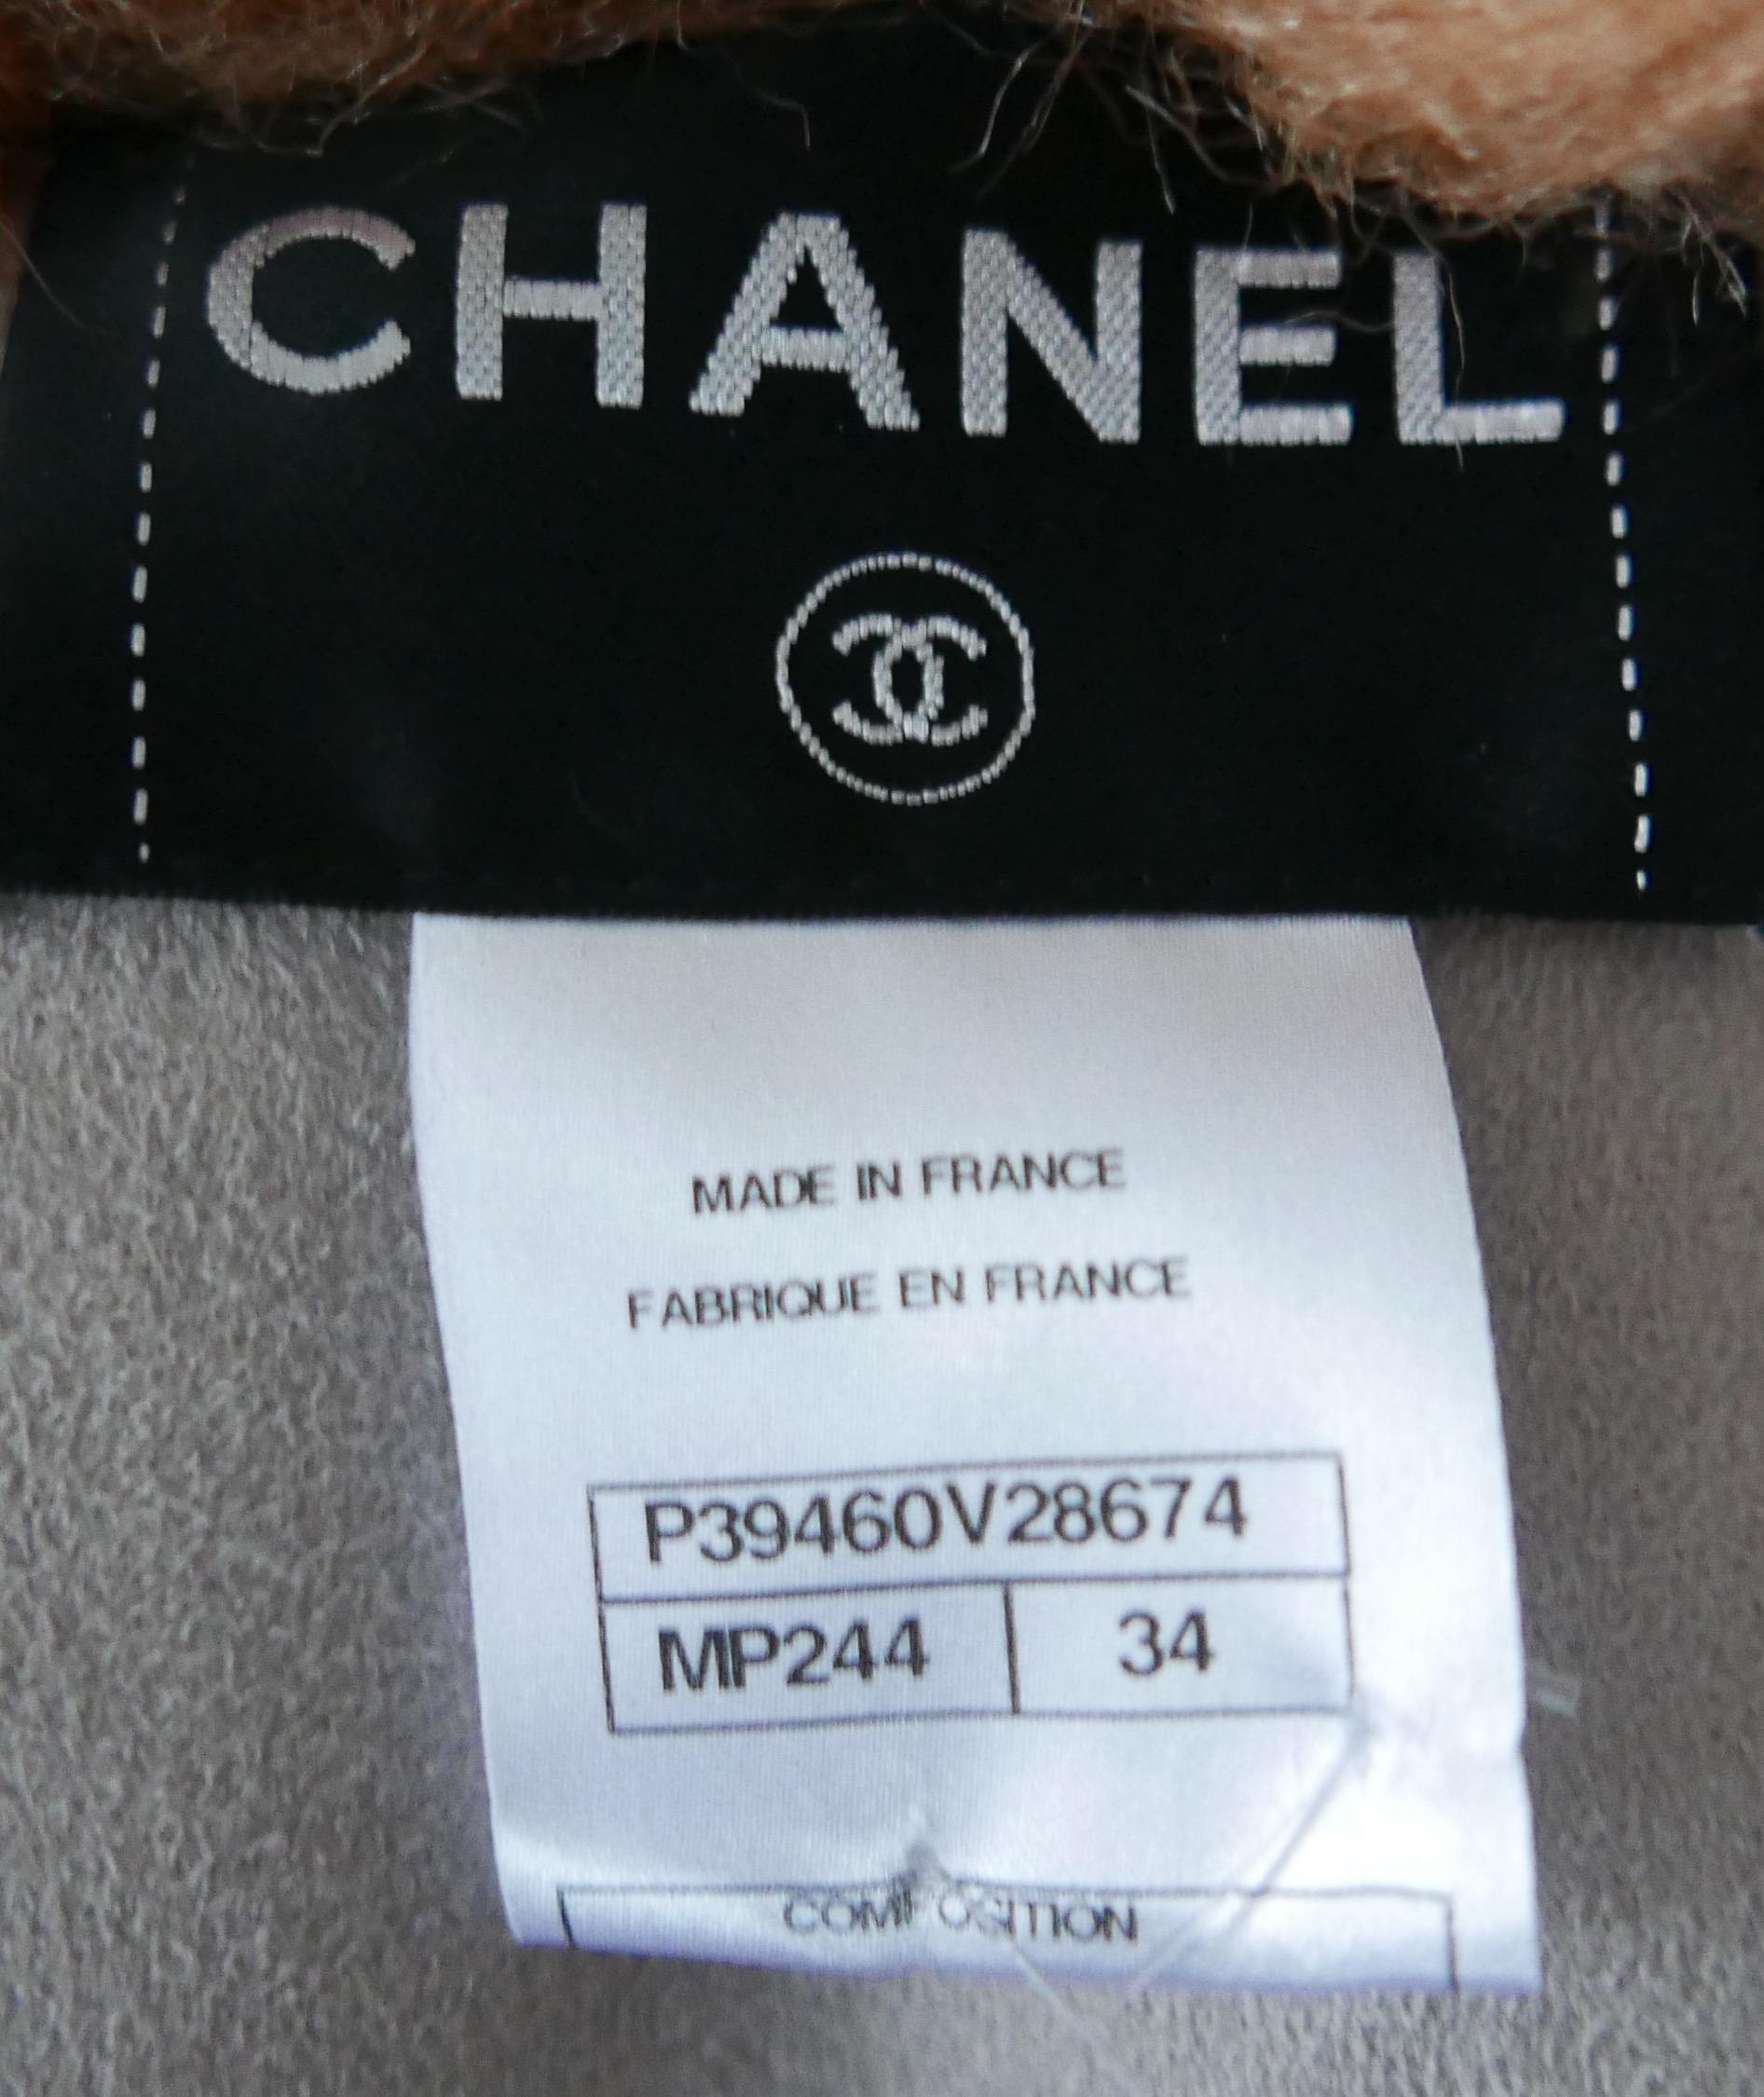 Chanel Fall 2010 Hooded Yeti Faux Fur Coat For Sale 4